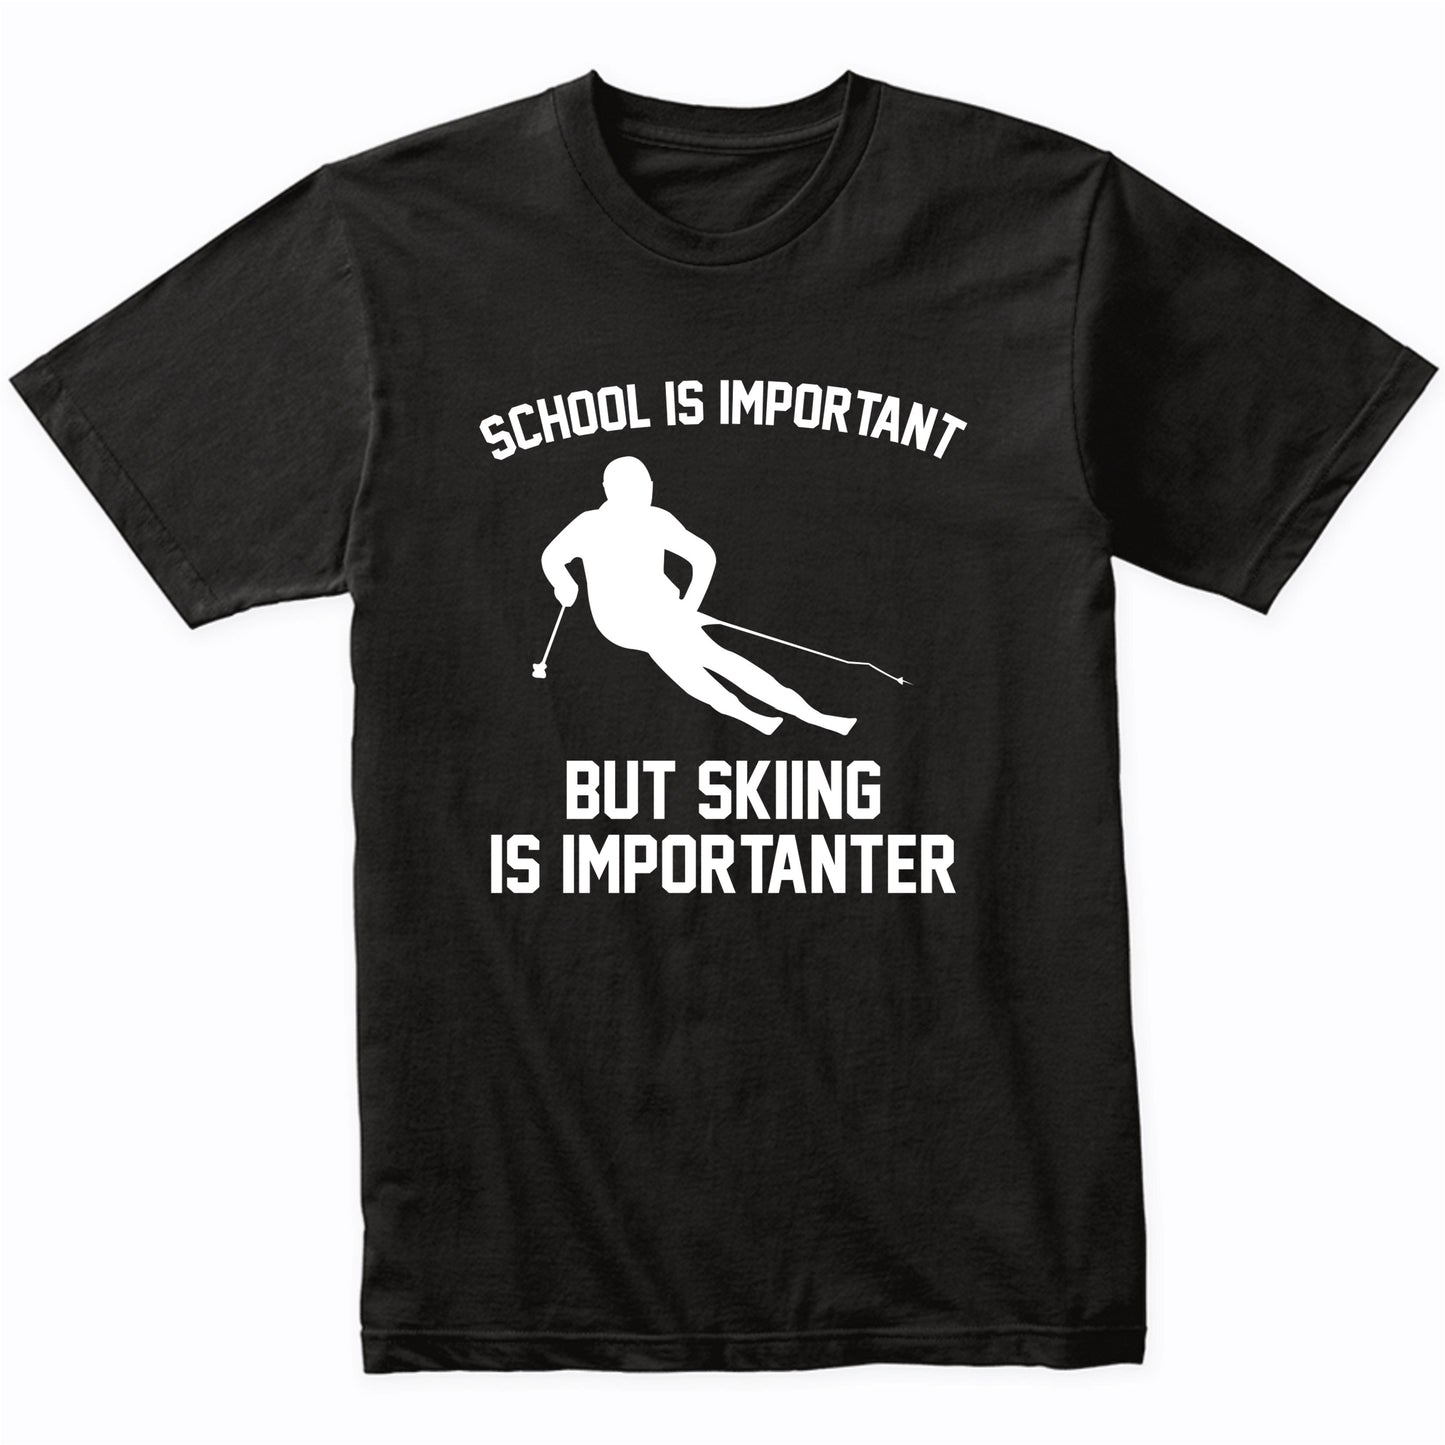 School Is Important But Skiing Is Importanter Funny Shirt